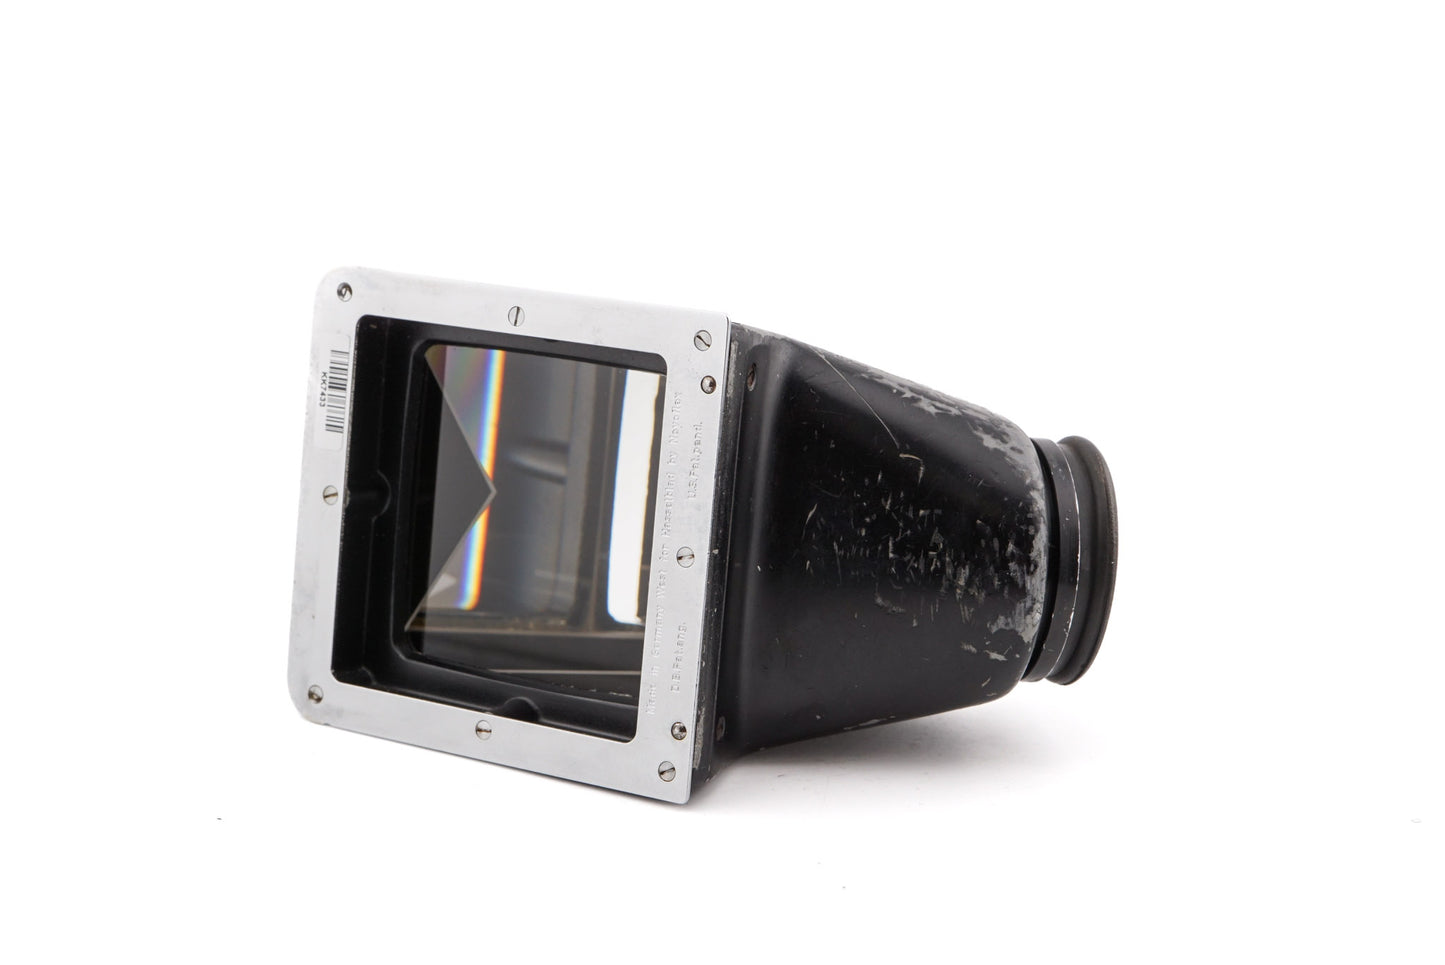 Hasselblad NC-2 Prism Viewfinder (TIPOC/52027)